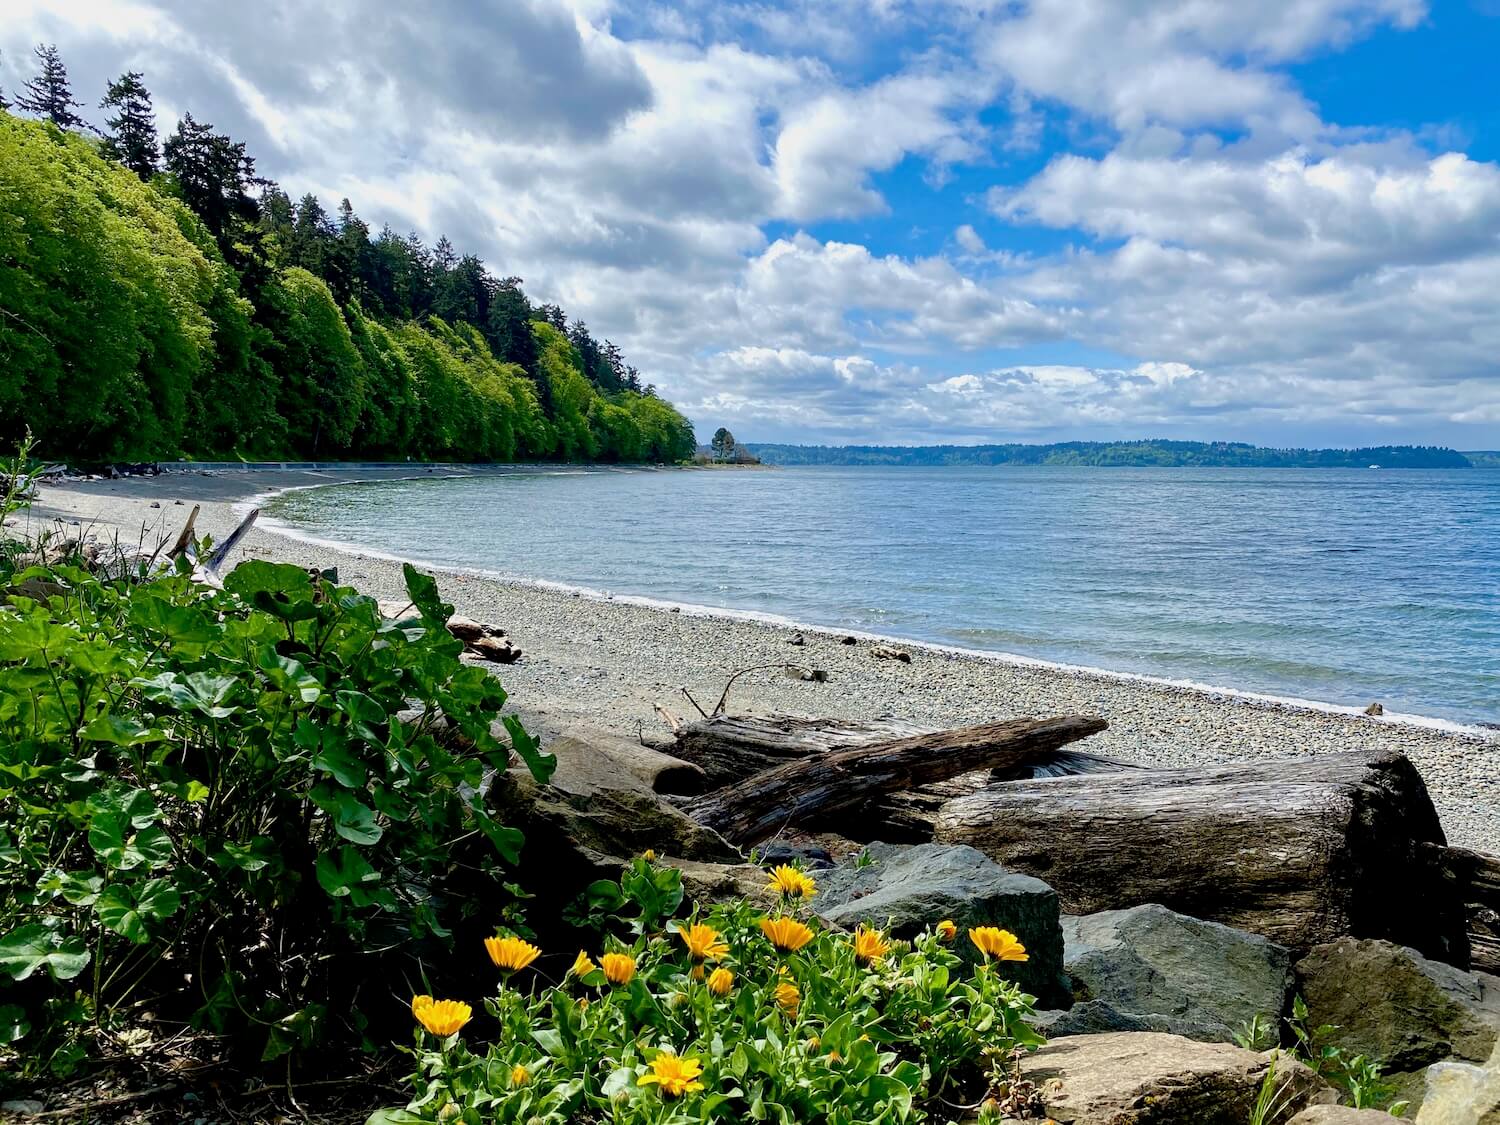 A great thing to do in West Seattle is walk along the North Beach Trail of Lincoln Park. Here the half-moon shaped beach is made up a gravely pebbles and driftwood piled up closer to some greenery and orange flowers. The maples in the distance are just pushing out their lime green leaves for spring and the grayish blue water is calm below partly cloudy skies.